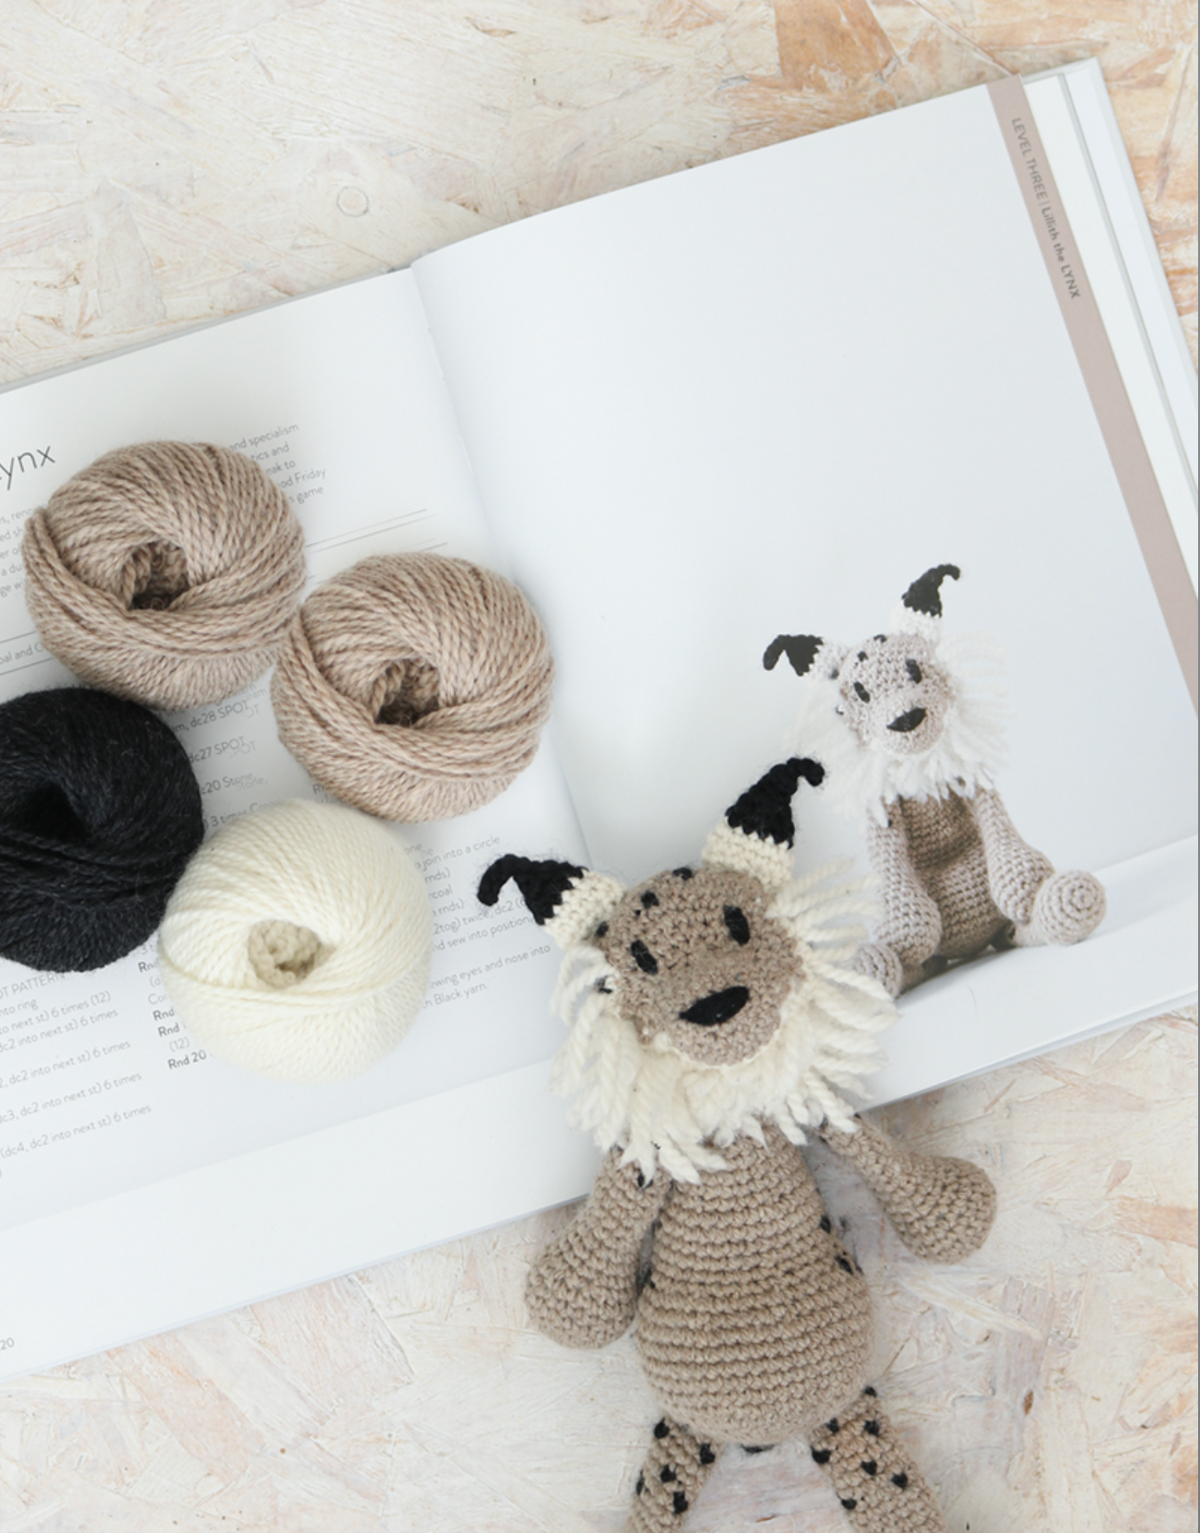 TOFT - The New Collection: Edward's Menagerie Book by Kerry Lord - YourNextKnit